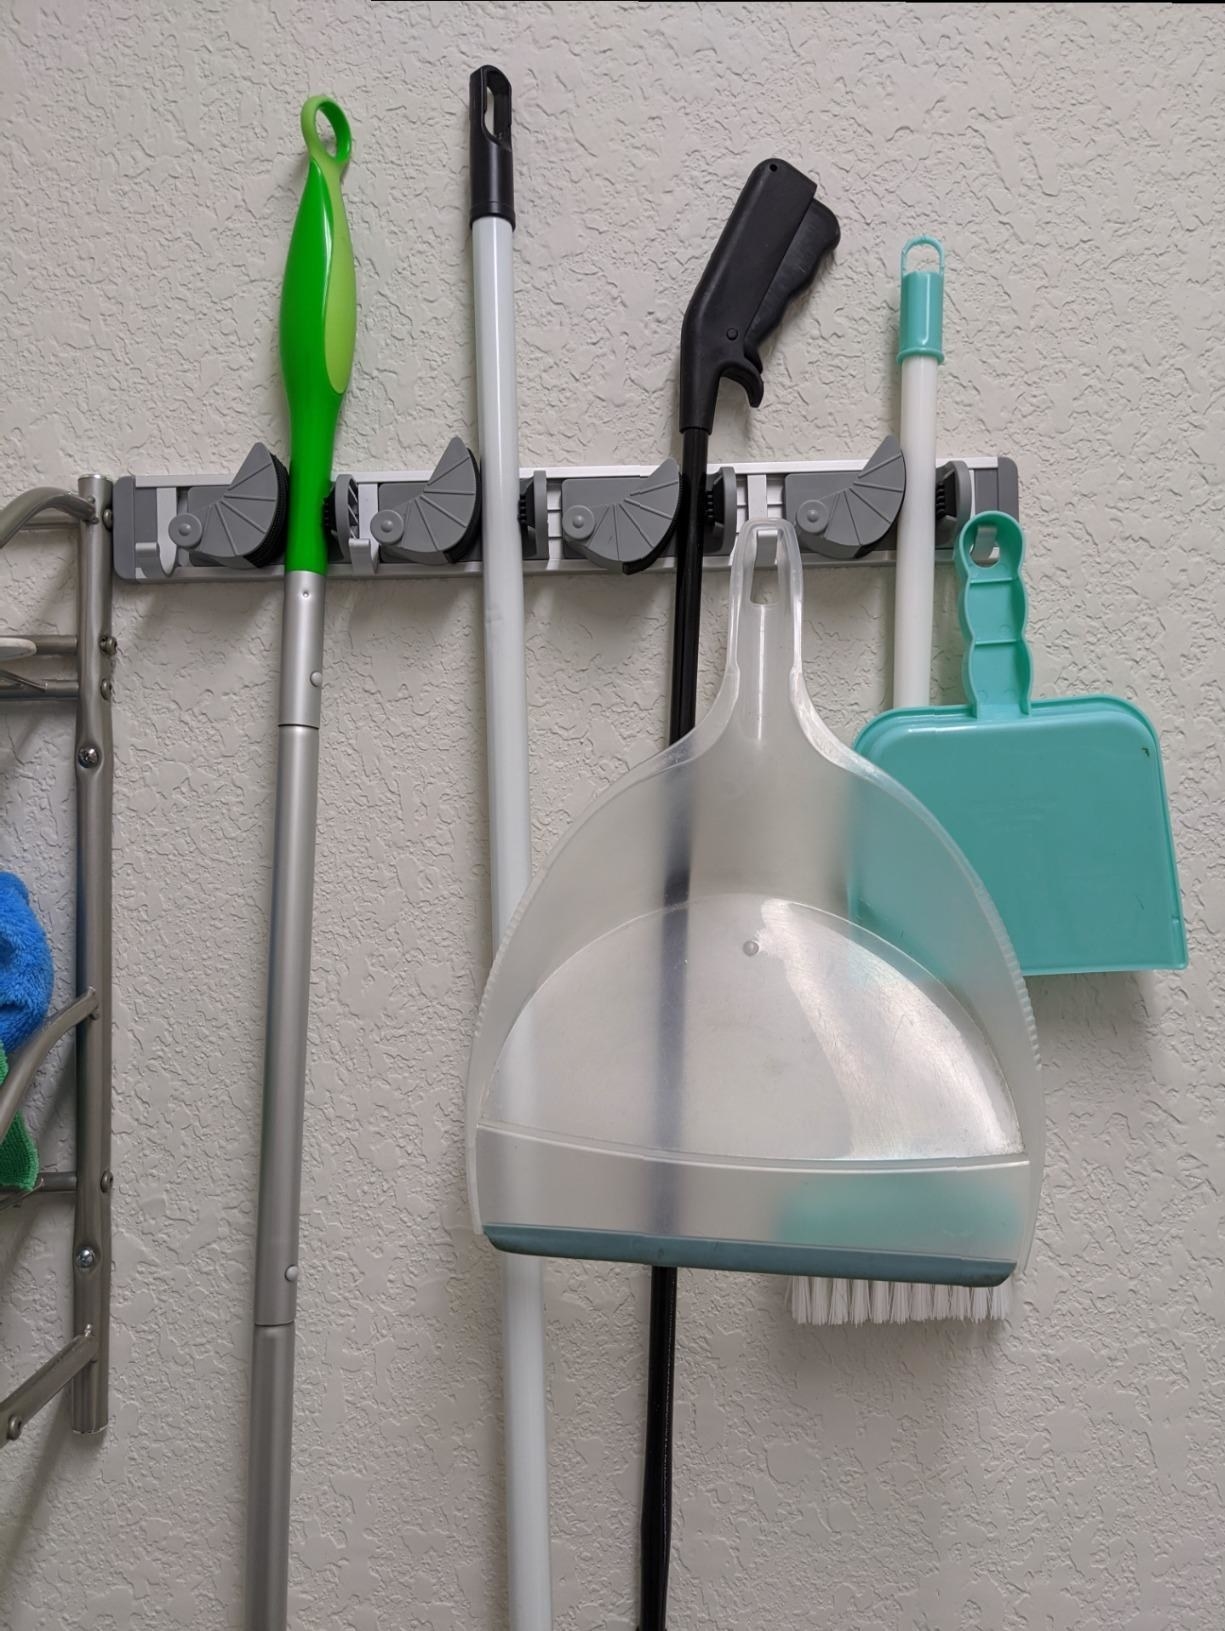 Reviewer photo of various cleaning tools placed in storage holder